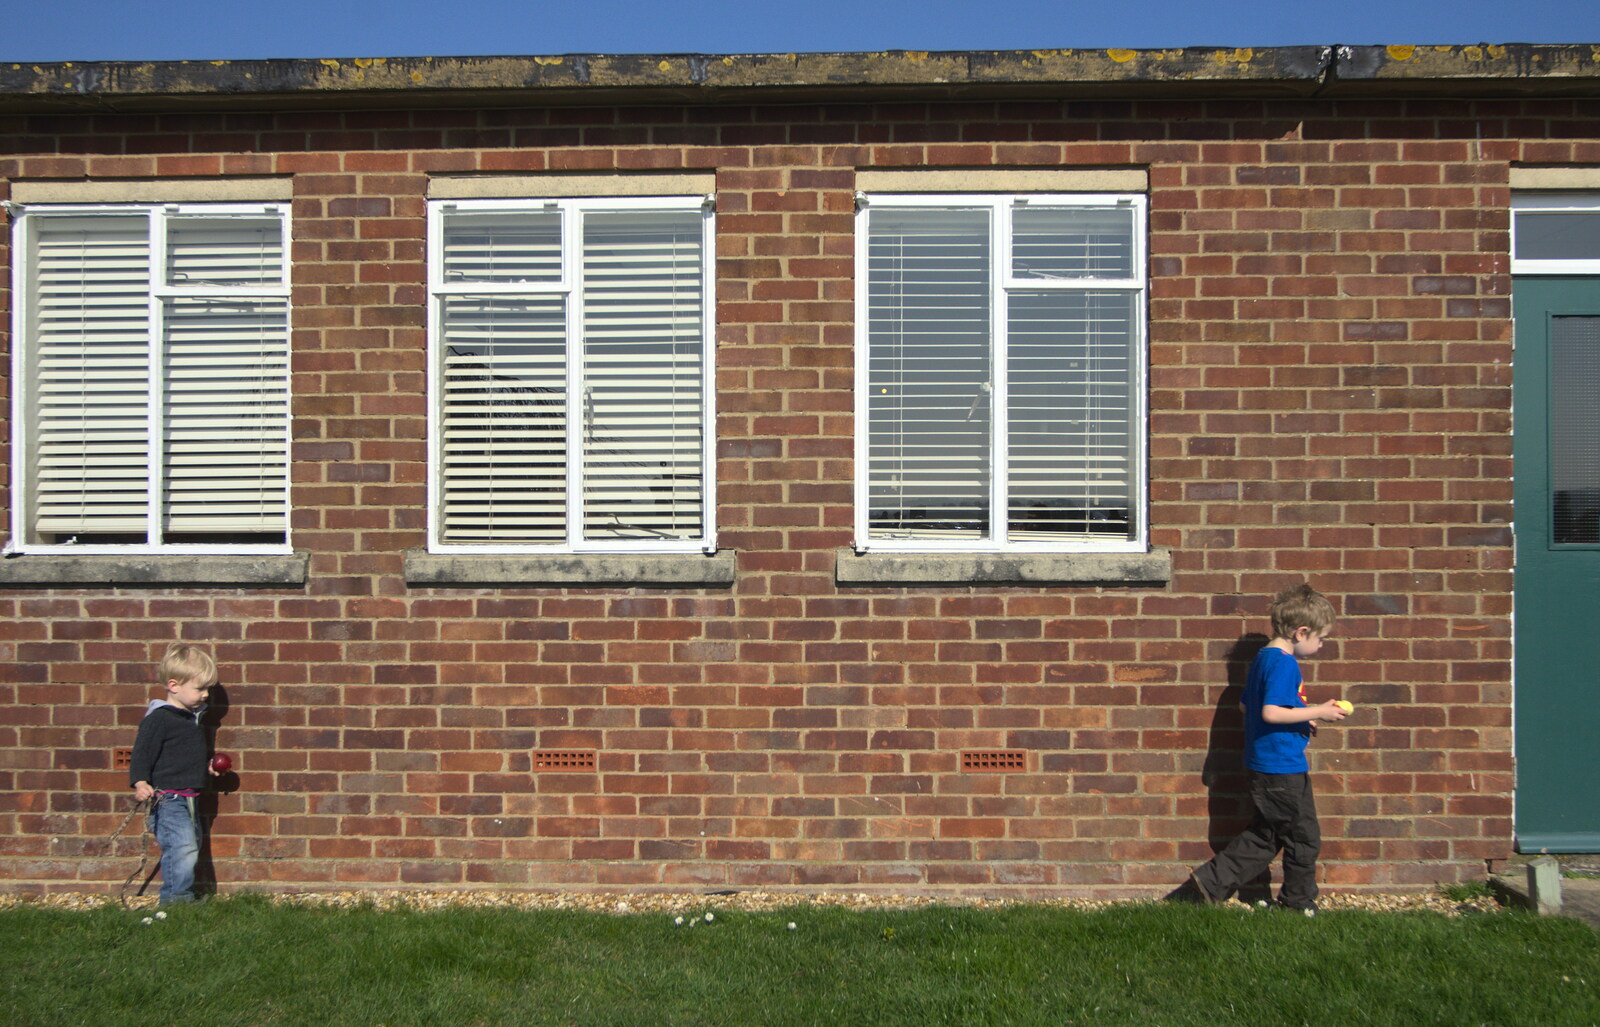 Harry and Fred trundle along the wall of the café from A Day Out at Duxford, Cambridgeshire - 9th March 2014